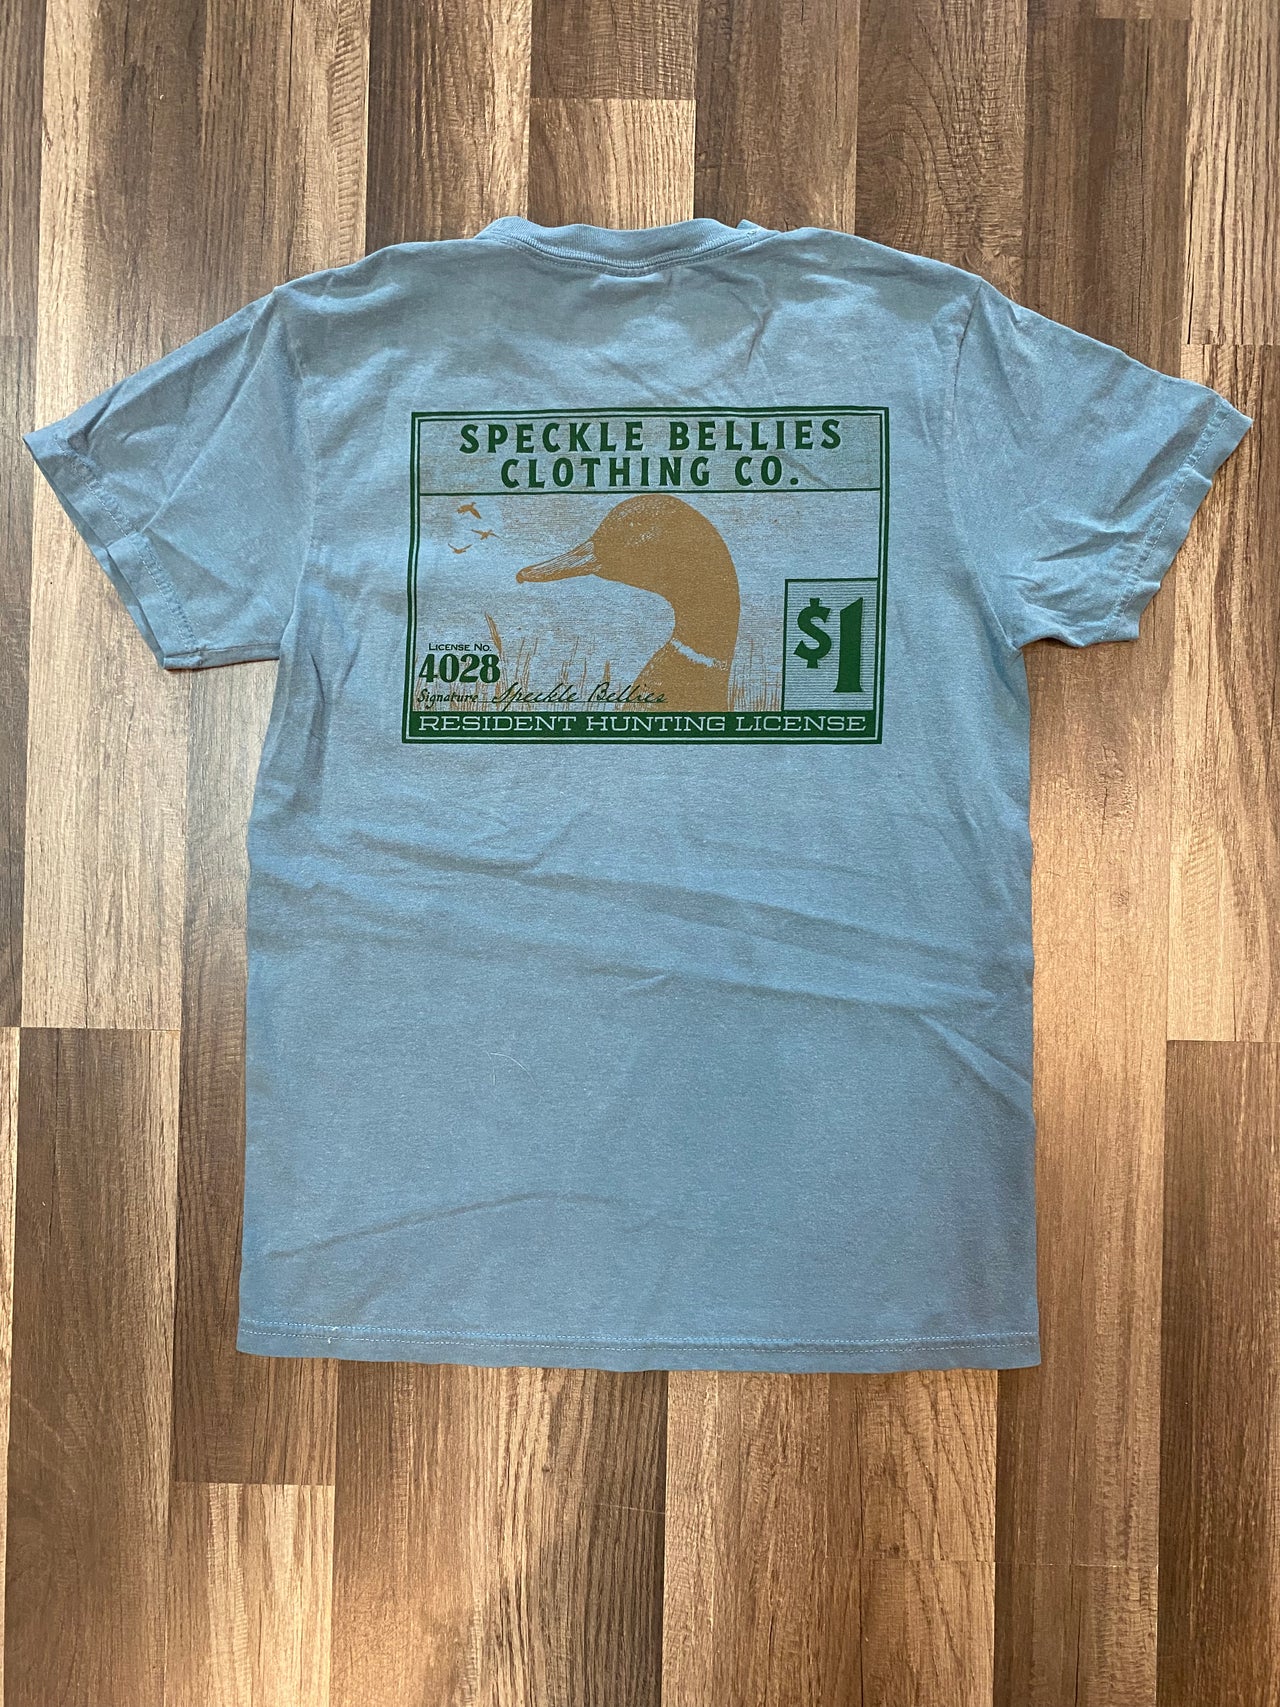 Experience timeless comfort with the Comfort Color Pocket Tee. Crafted from 6.1 ounces of 100% ring-spun cotton, featuring a soft-washed garment-dyed fabric, twill-taped neck, and double-needle stitching. Pigment shades naturally vary, adding individualized charm to this versatile and enduring wardrobe essential."